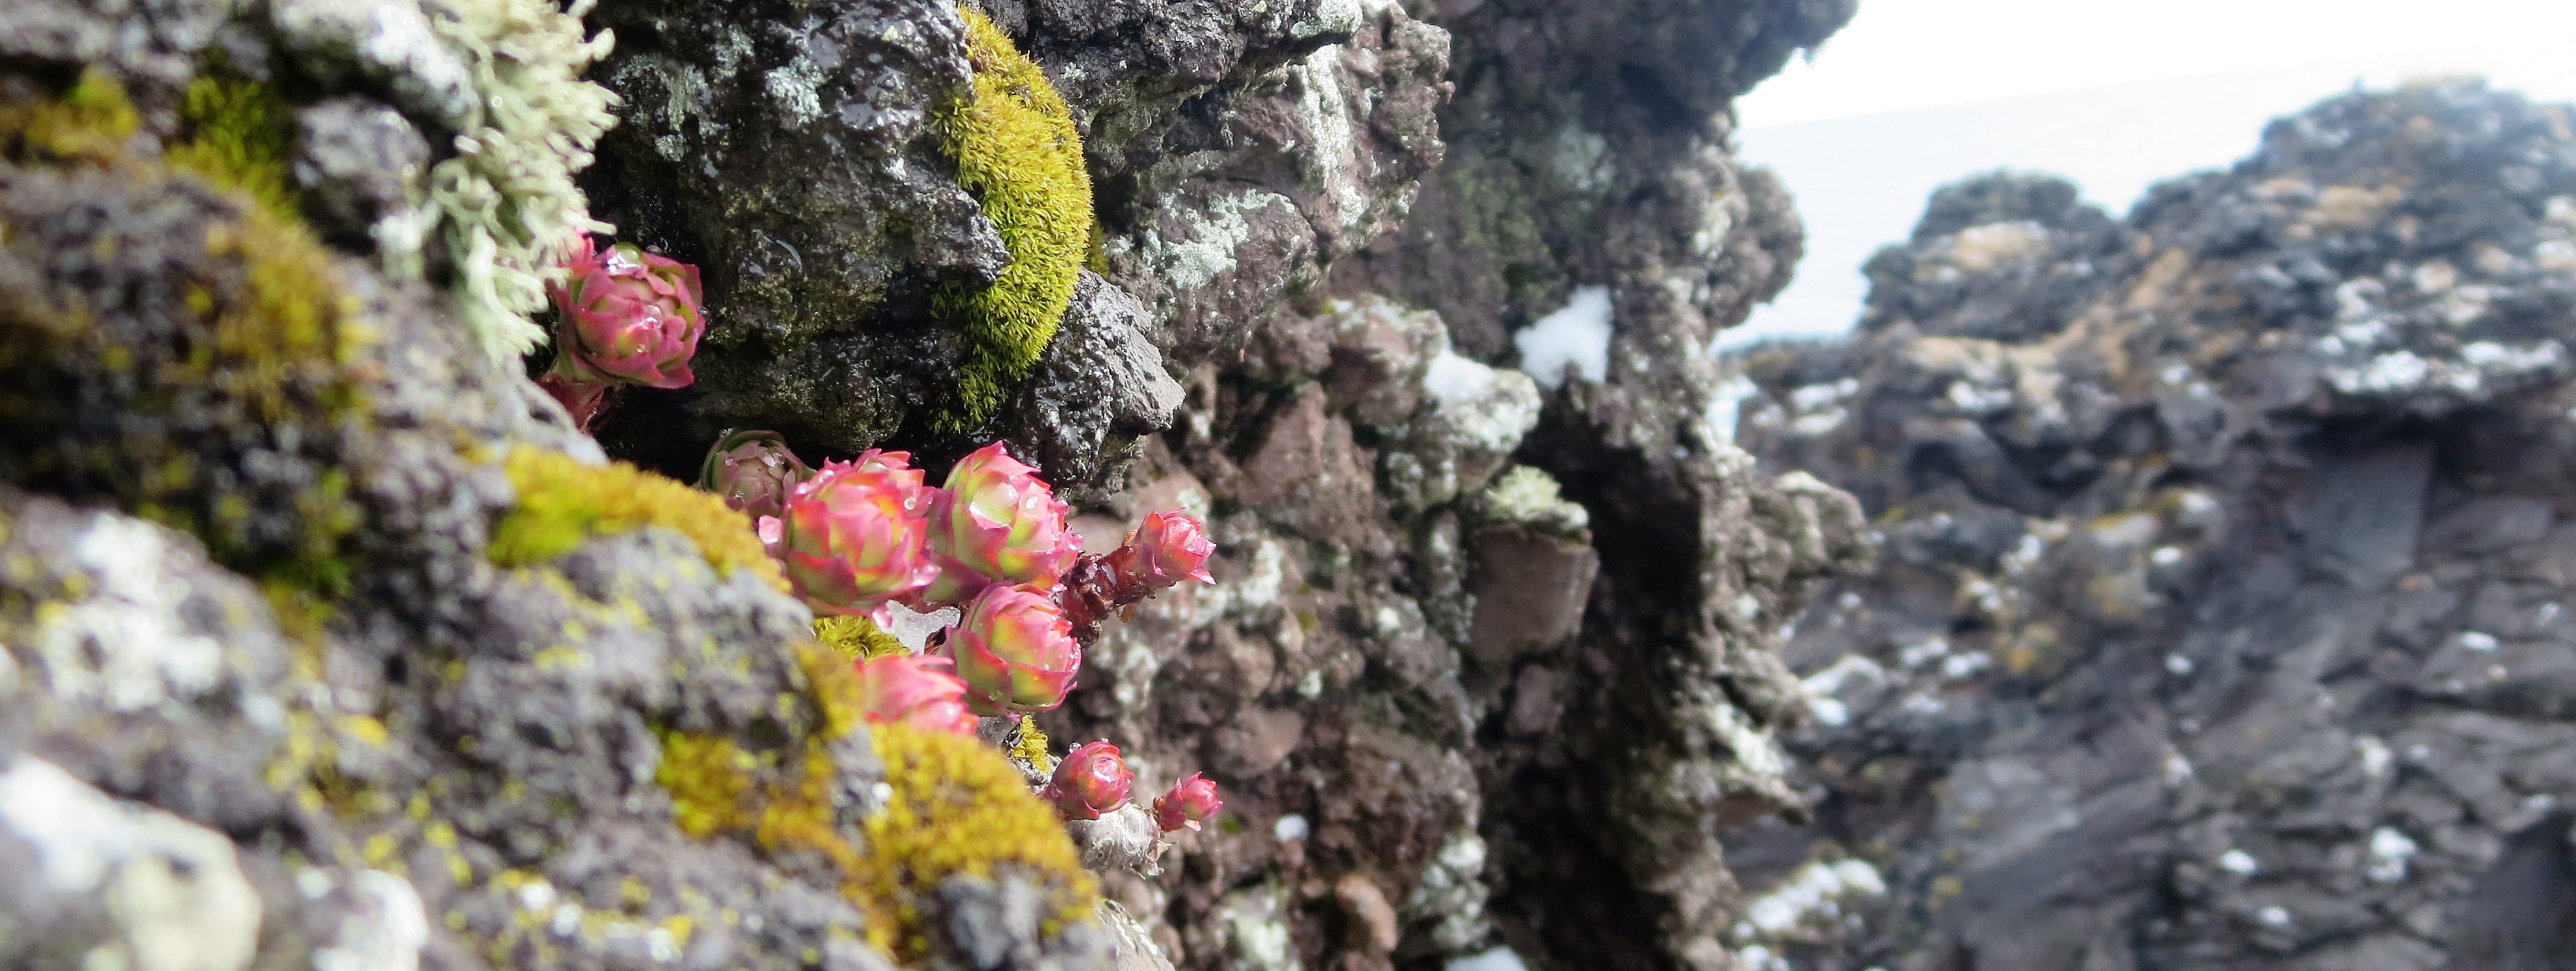 Decorative photo of flowers, rocks and moss. Taken by Bailey Bingham, IB student